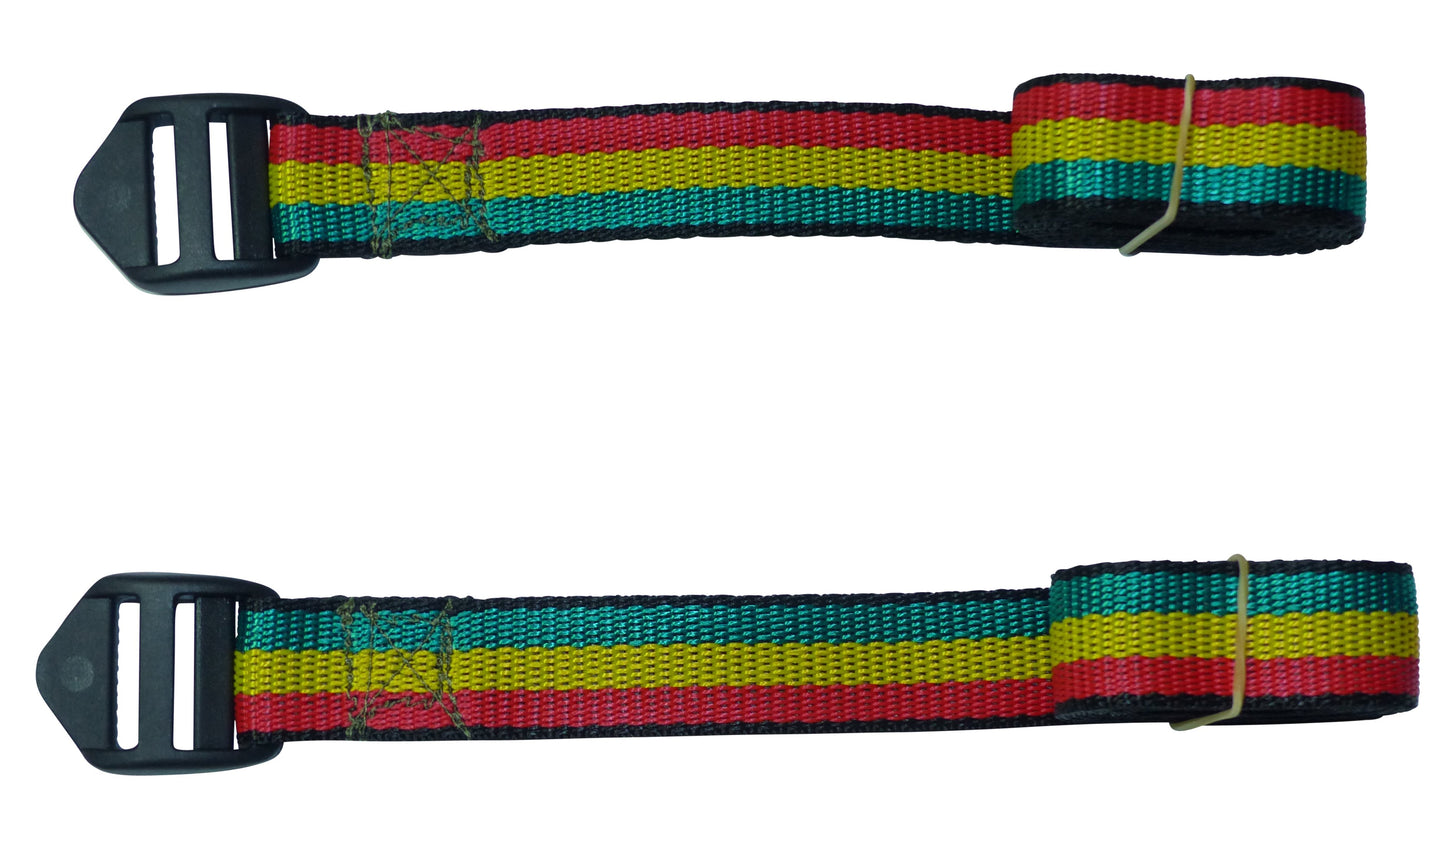 Benristraps 25mm Webbing Strap with Superstrong Ladderlock Buckle (Pair) in jamaica